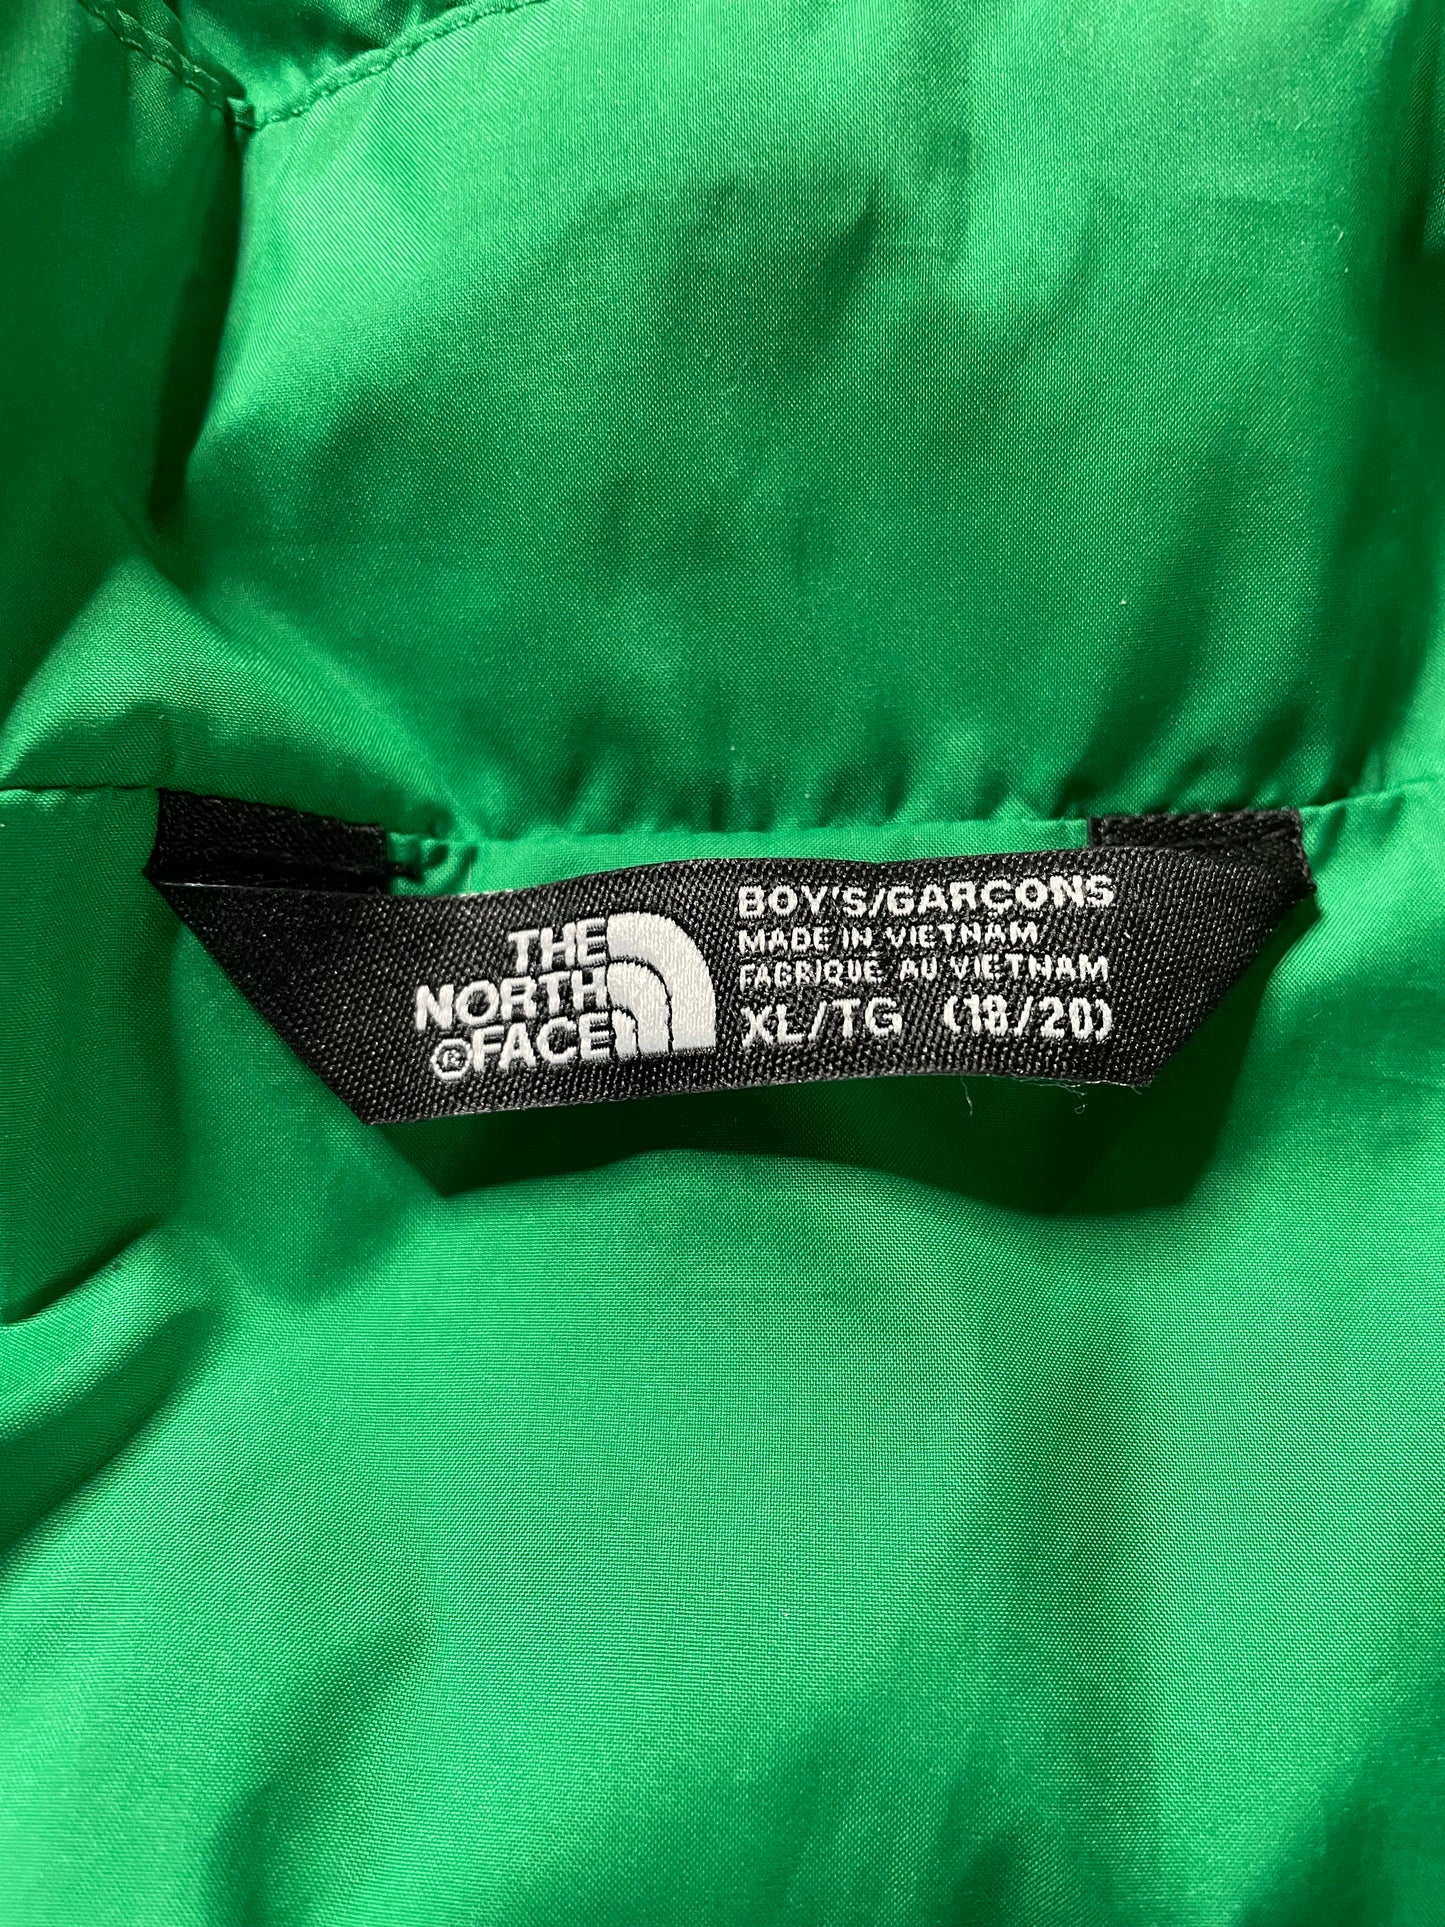 The North Face 550 Jacket